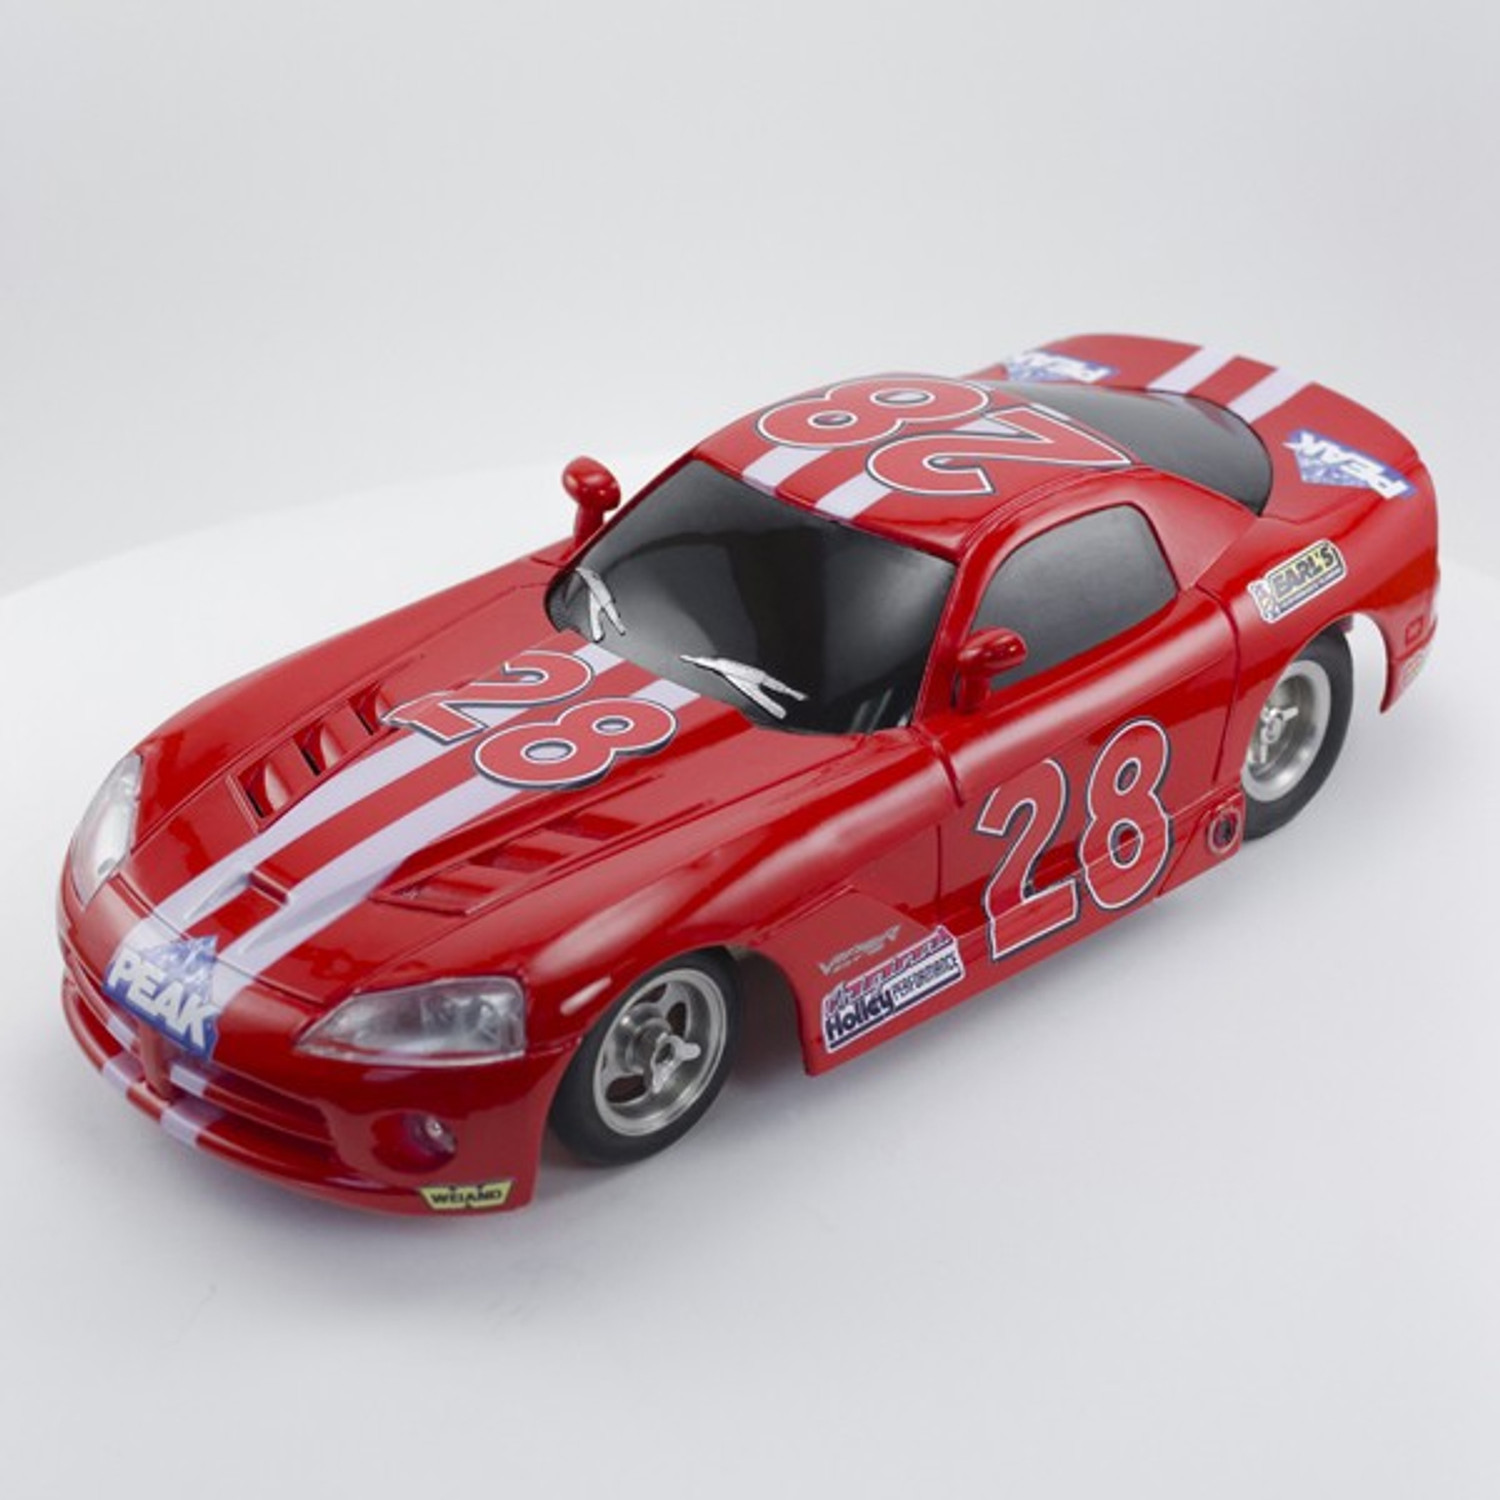 Stock Number: 16146 Viper STR 2009 by Buzz Co